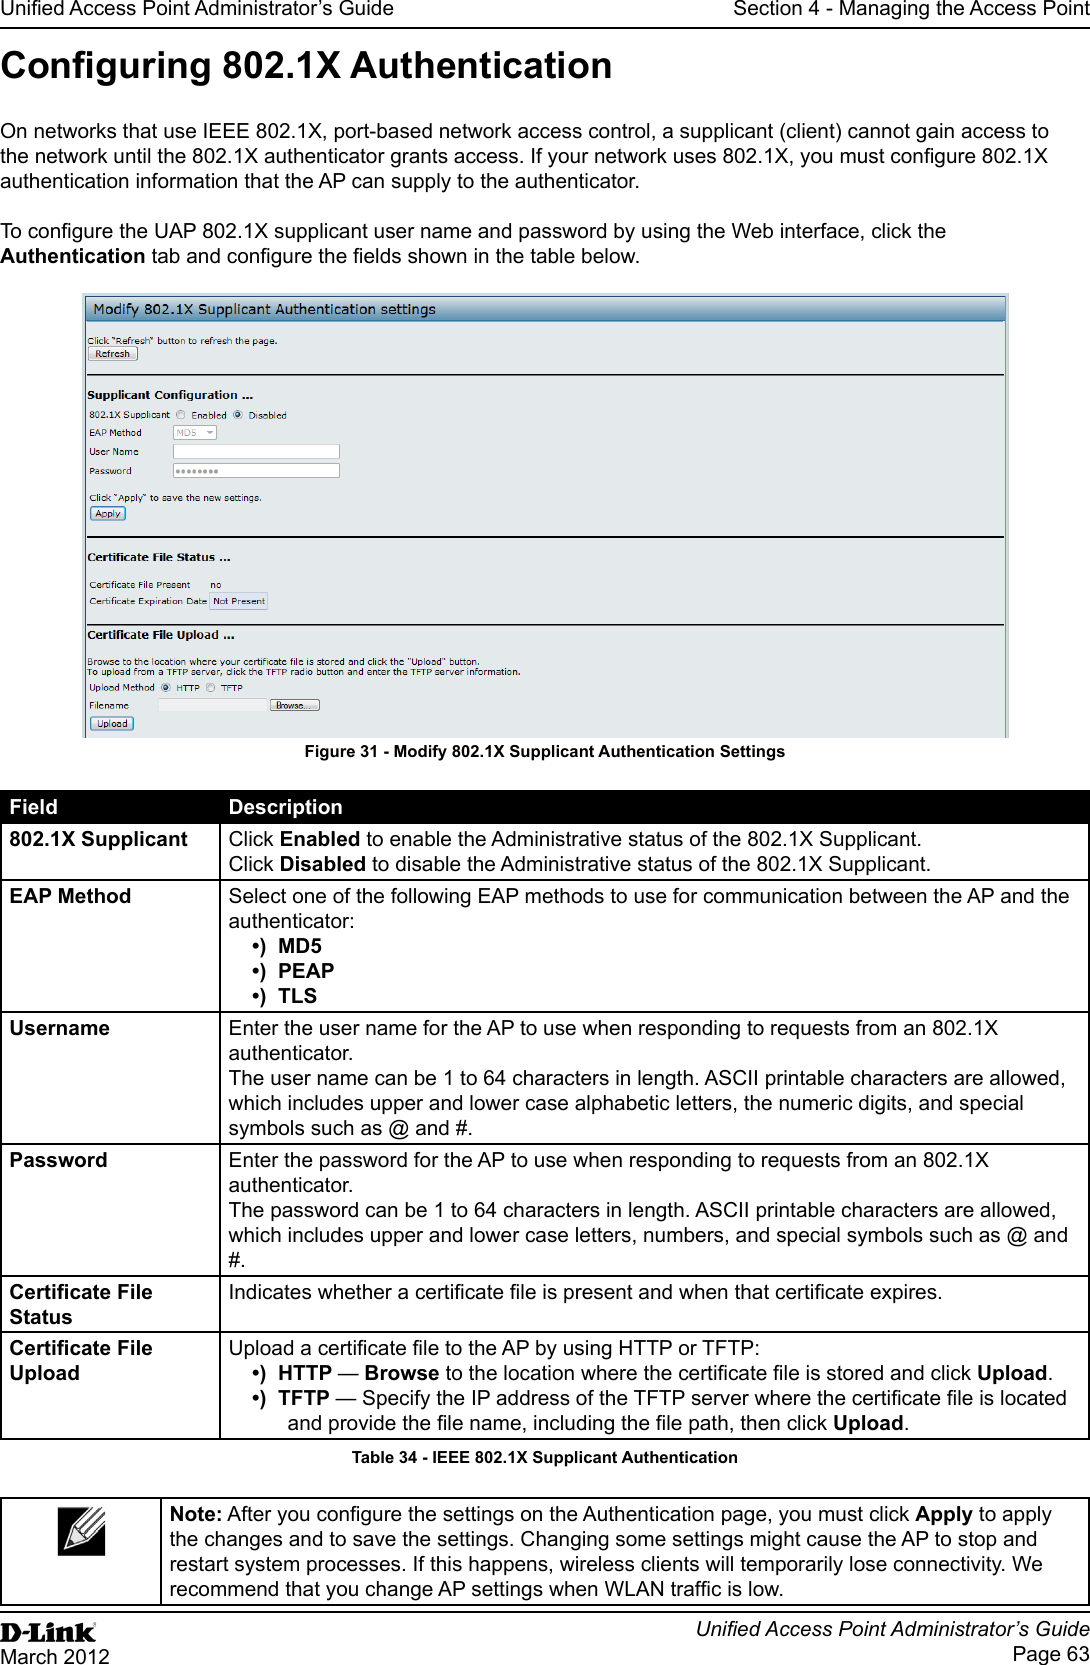 Unied Access Point Administrator’s GuideUnied Access Point Administrator’s GuidePage 63March 2012Section 4 - Managing the Access PointConguring 802.1X AuthenticationOn networks that use IEEE 802.1X, port-based network access control, a supplicant (client) cannot gain access to the network until the 802.1X authenticator grants access. If your network uses 802.1X, you must congure 802.1X authentication information that the AP can supply to the authenticator.To congure the UAP 802.1X supplicant user name and password by using the Web interface, click the Authentication tab and congure the elds shown in the table below.Figure 31 - Modify 802.1X Supplicant Authentication SettingsField Description802.1X Supplicant Click Enabled to enable the Administrative status of the 802.1X Supplicant.Click Disabled to disable the Administrative status of the 802.1X Supplicant.EAP Method Select one of the following EAP methods to use for communication between the AP and the authenticator:•)  MD5•)  PEAP•)  TLSUsername Enter the user name for the AP to use when responding to requests from an 802.1X authenticator. The user name can be 1 to 64 characters in length. ASCII printable characters are allowed, which includes upper and lower case alphabetic letters, the numeric digits, and special symbols such as @ and #.Password Enter the password for the AP to use when responding to requests from an 802.1X authenticator. The password can be 1 to 64 characters in length. ASCII printable characters are allowed, which includes upper and lower case letters, numbers, and special symbols such as @ and #.Certicate File StatusIndicates whether a certicate le is present and when that certicate expires.Certicate File UploadUpload a certicate le to the AP by using HTTP or TFTP:•)  HTTP — Browse to the location where the certicate le is stored and click Upload. •)  TFTP — Specify the IP address of the TFTP server where the certicate le is located and provide the le name, including the le path, then click Upload.Table 34 - IEEE 802.1X Supplicant AuthenticationNote: After you congure the settings on the Authentication page, you must click Apply to apply the changes and to save the settings. Changing some settings might cause the AP to stop and restart system processes. If this happens, wireless clients will temporarily lose connectivity. We recommend that you change AP settings when WLAN trafc is low.